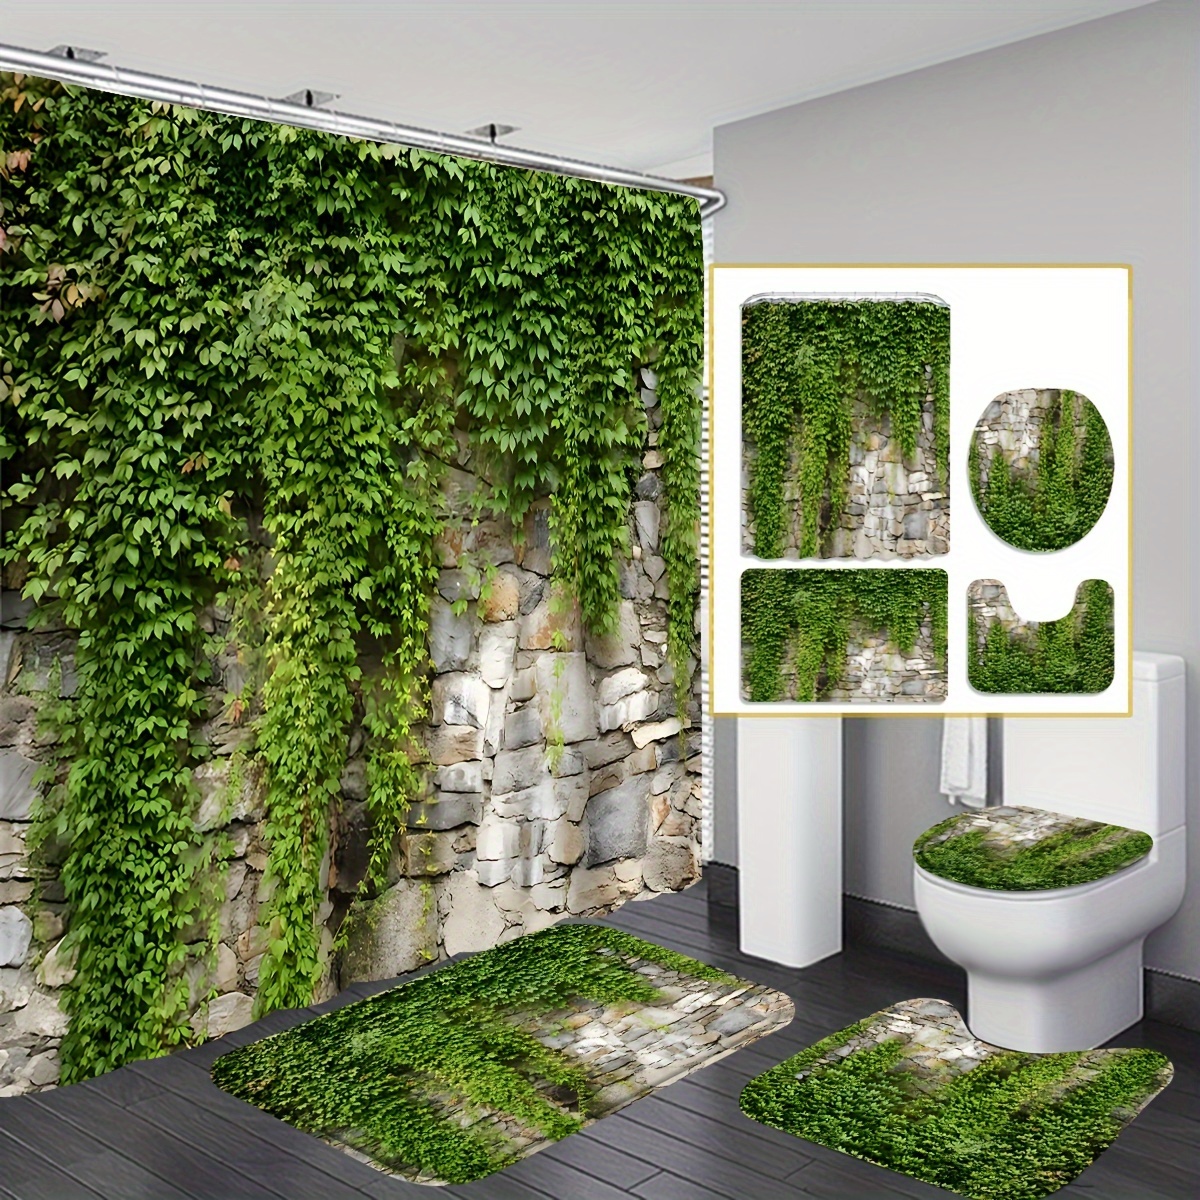 

1/4pcs Ivy Stone Wall Printed Shower Curtain Set, Waterproof Bathroom Partition Curtain With Hooks, Non-slip Bath Rug, U-shape Mat, Toilet Lid Cover Mat, Bathroom Accessories, Home Decor